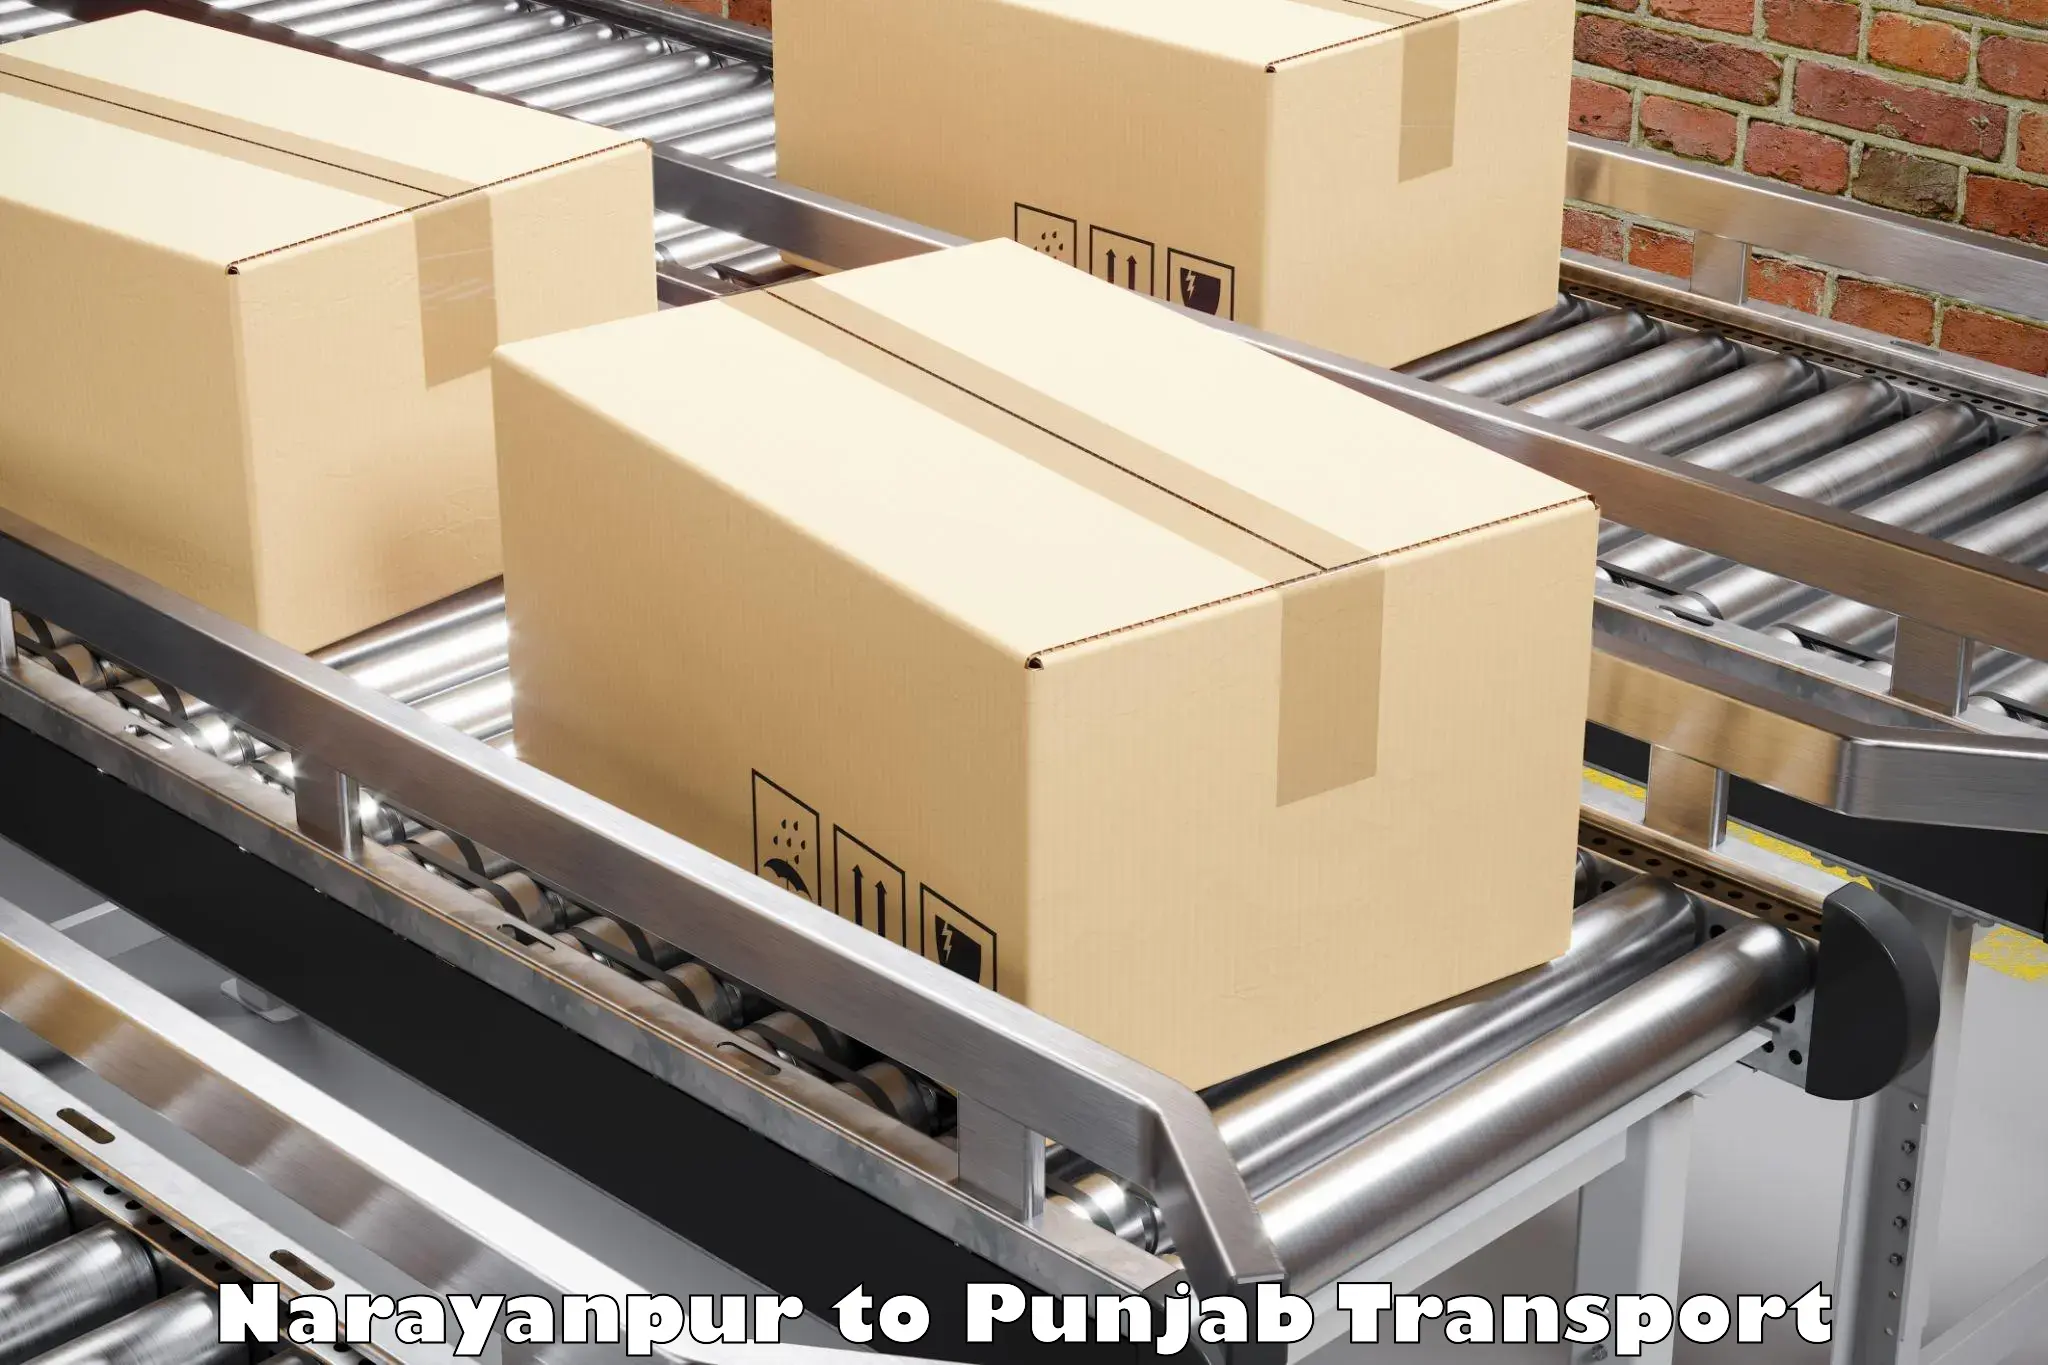 Daily parcel service transport Narayanpur to Khanna